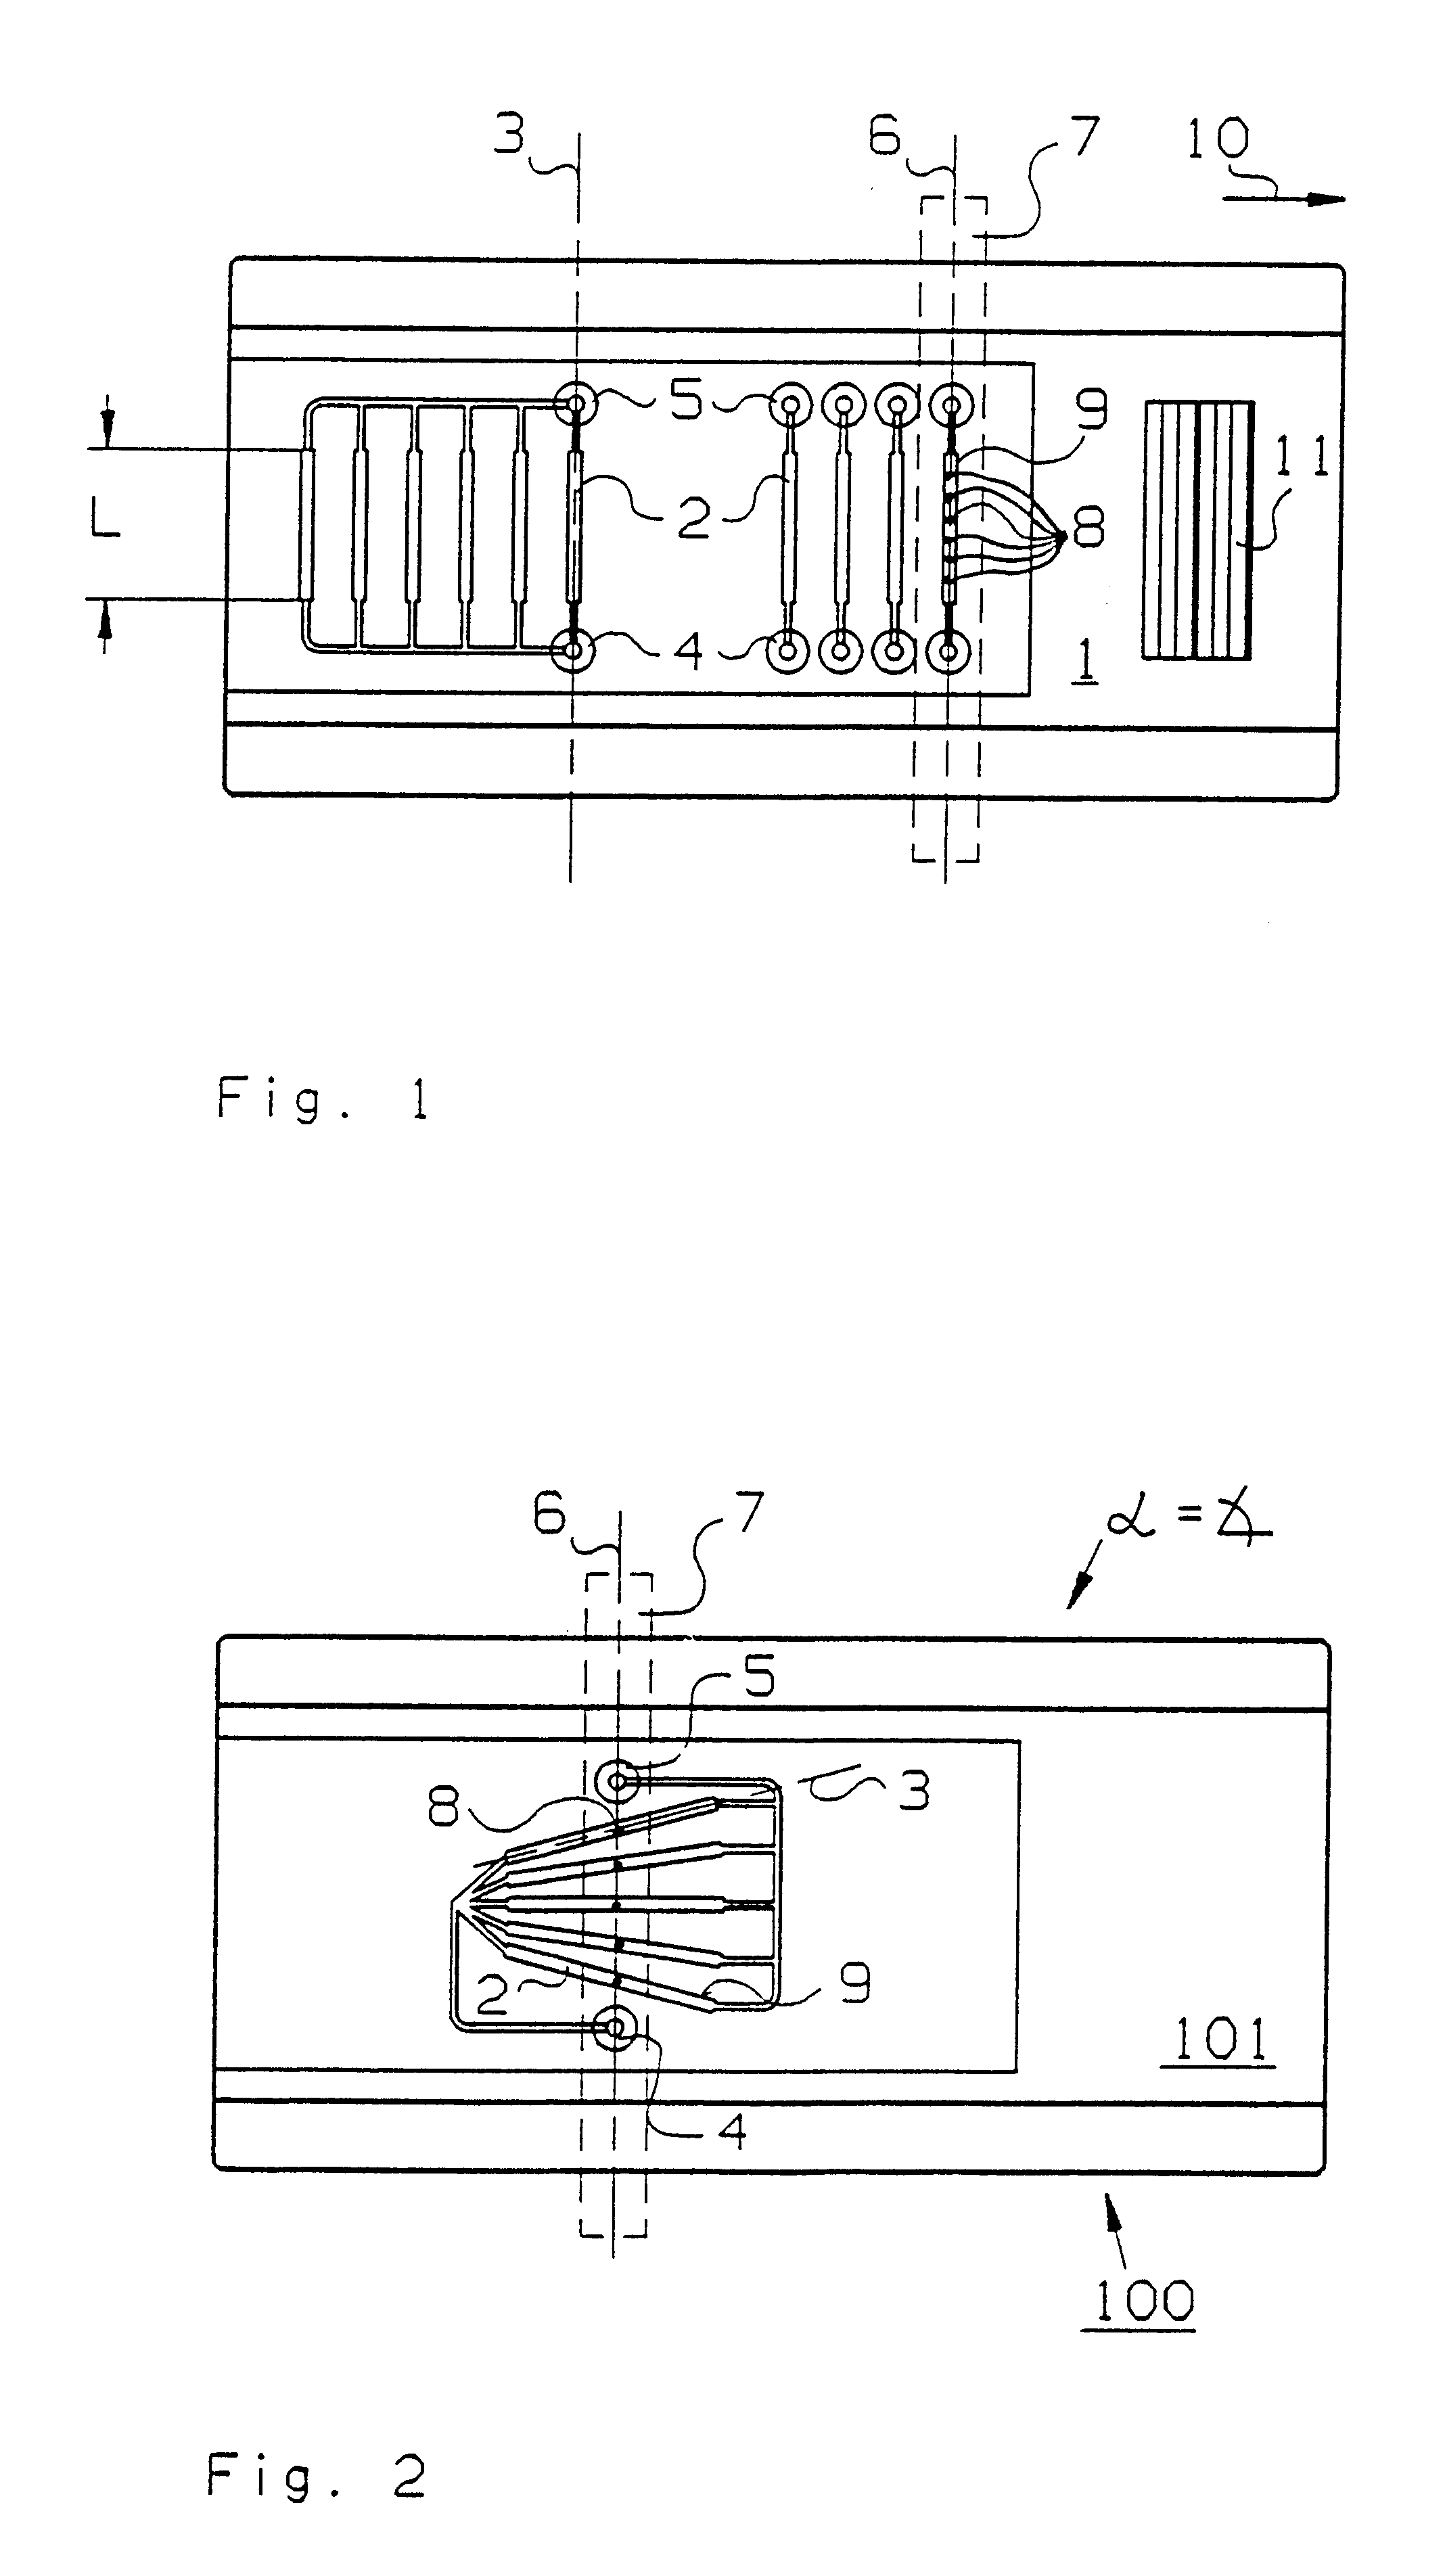 Device for measuring the concentration of gaseous and vaporous components of a gas mixture